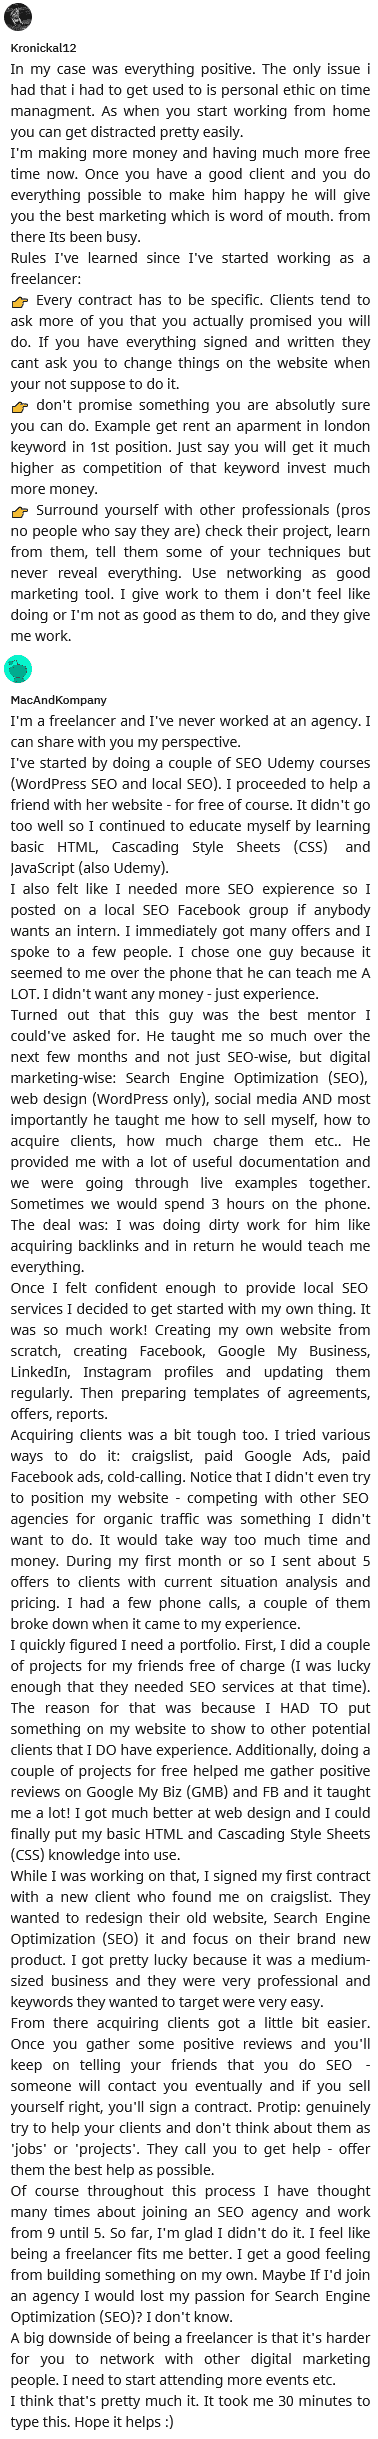 if you are an in house seo manager who wanted to abandon it to be a freelance or build your biz read first this people thought